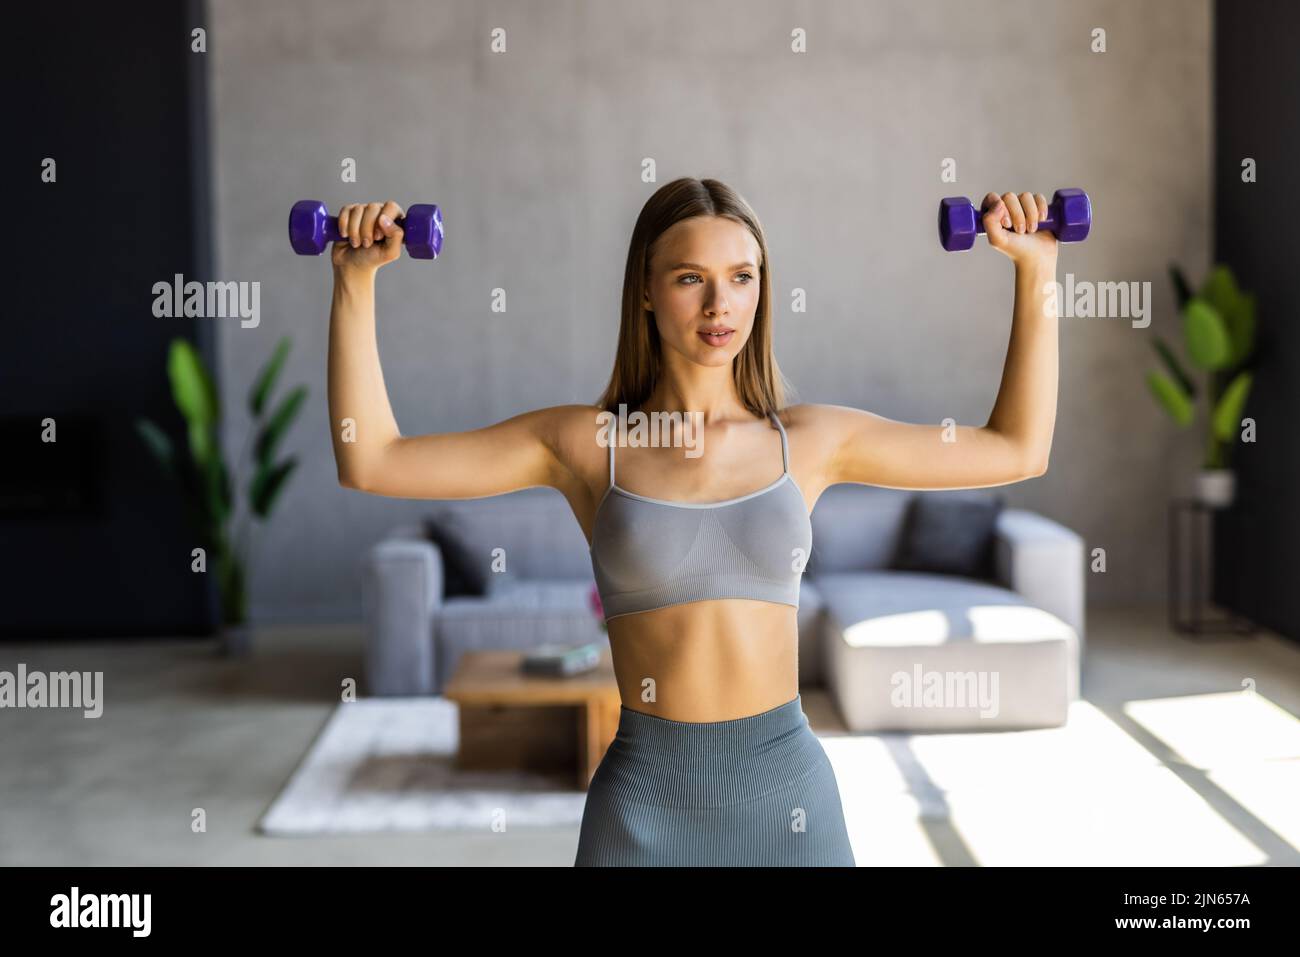 Fitness at home concept. Smiling young woman on mat with sports equipment at home. Stock Photo